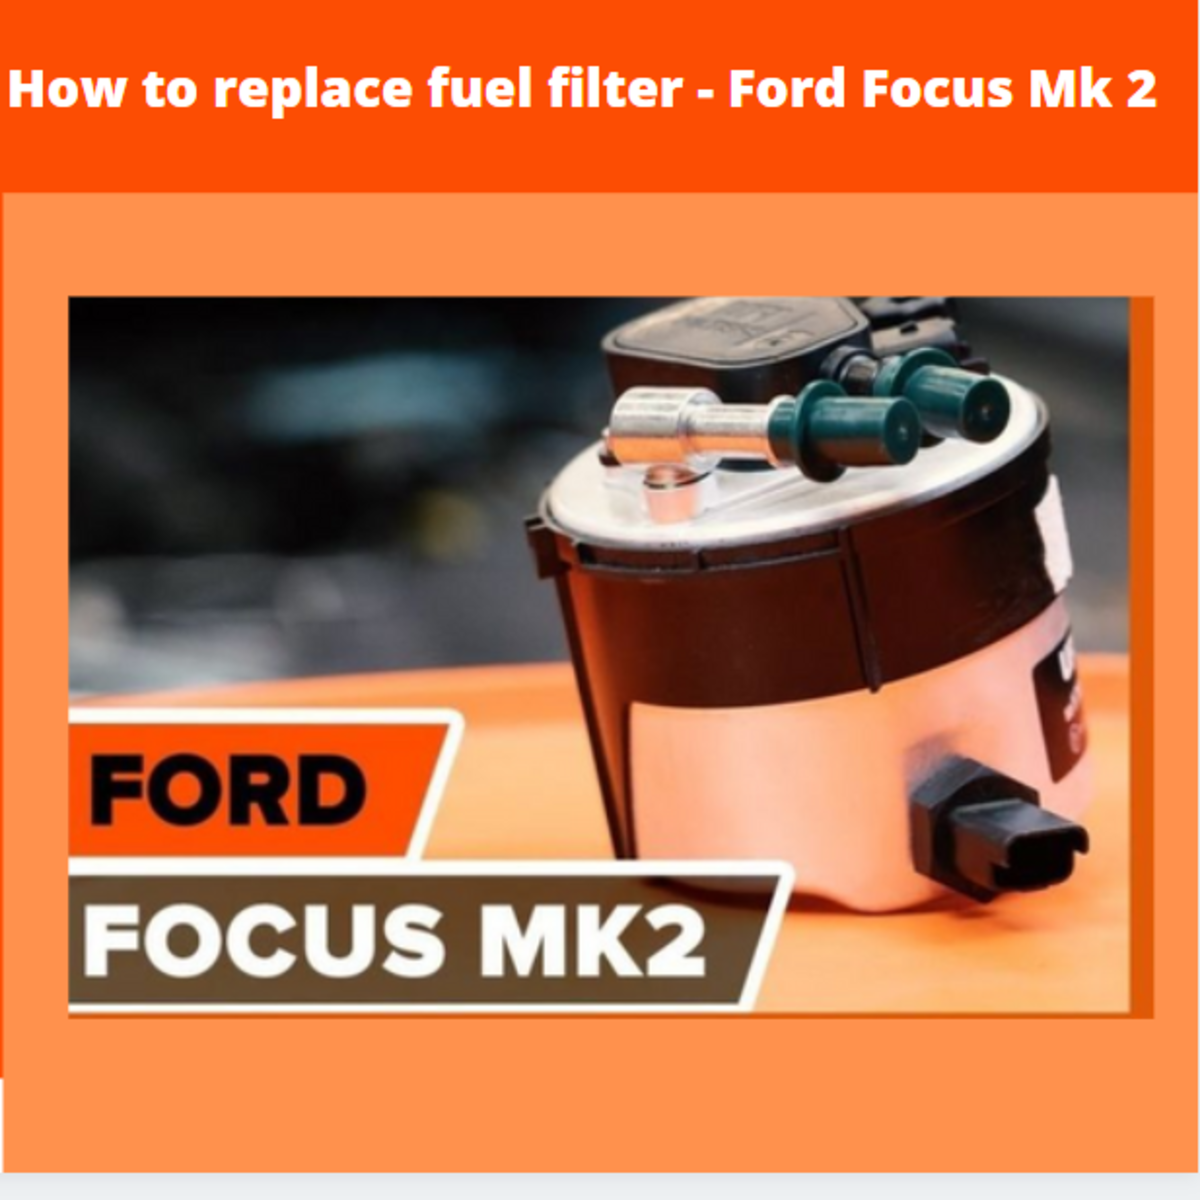 Replacing the fuel filter on a Ford Focus Mk2 on your own